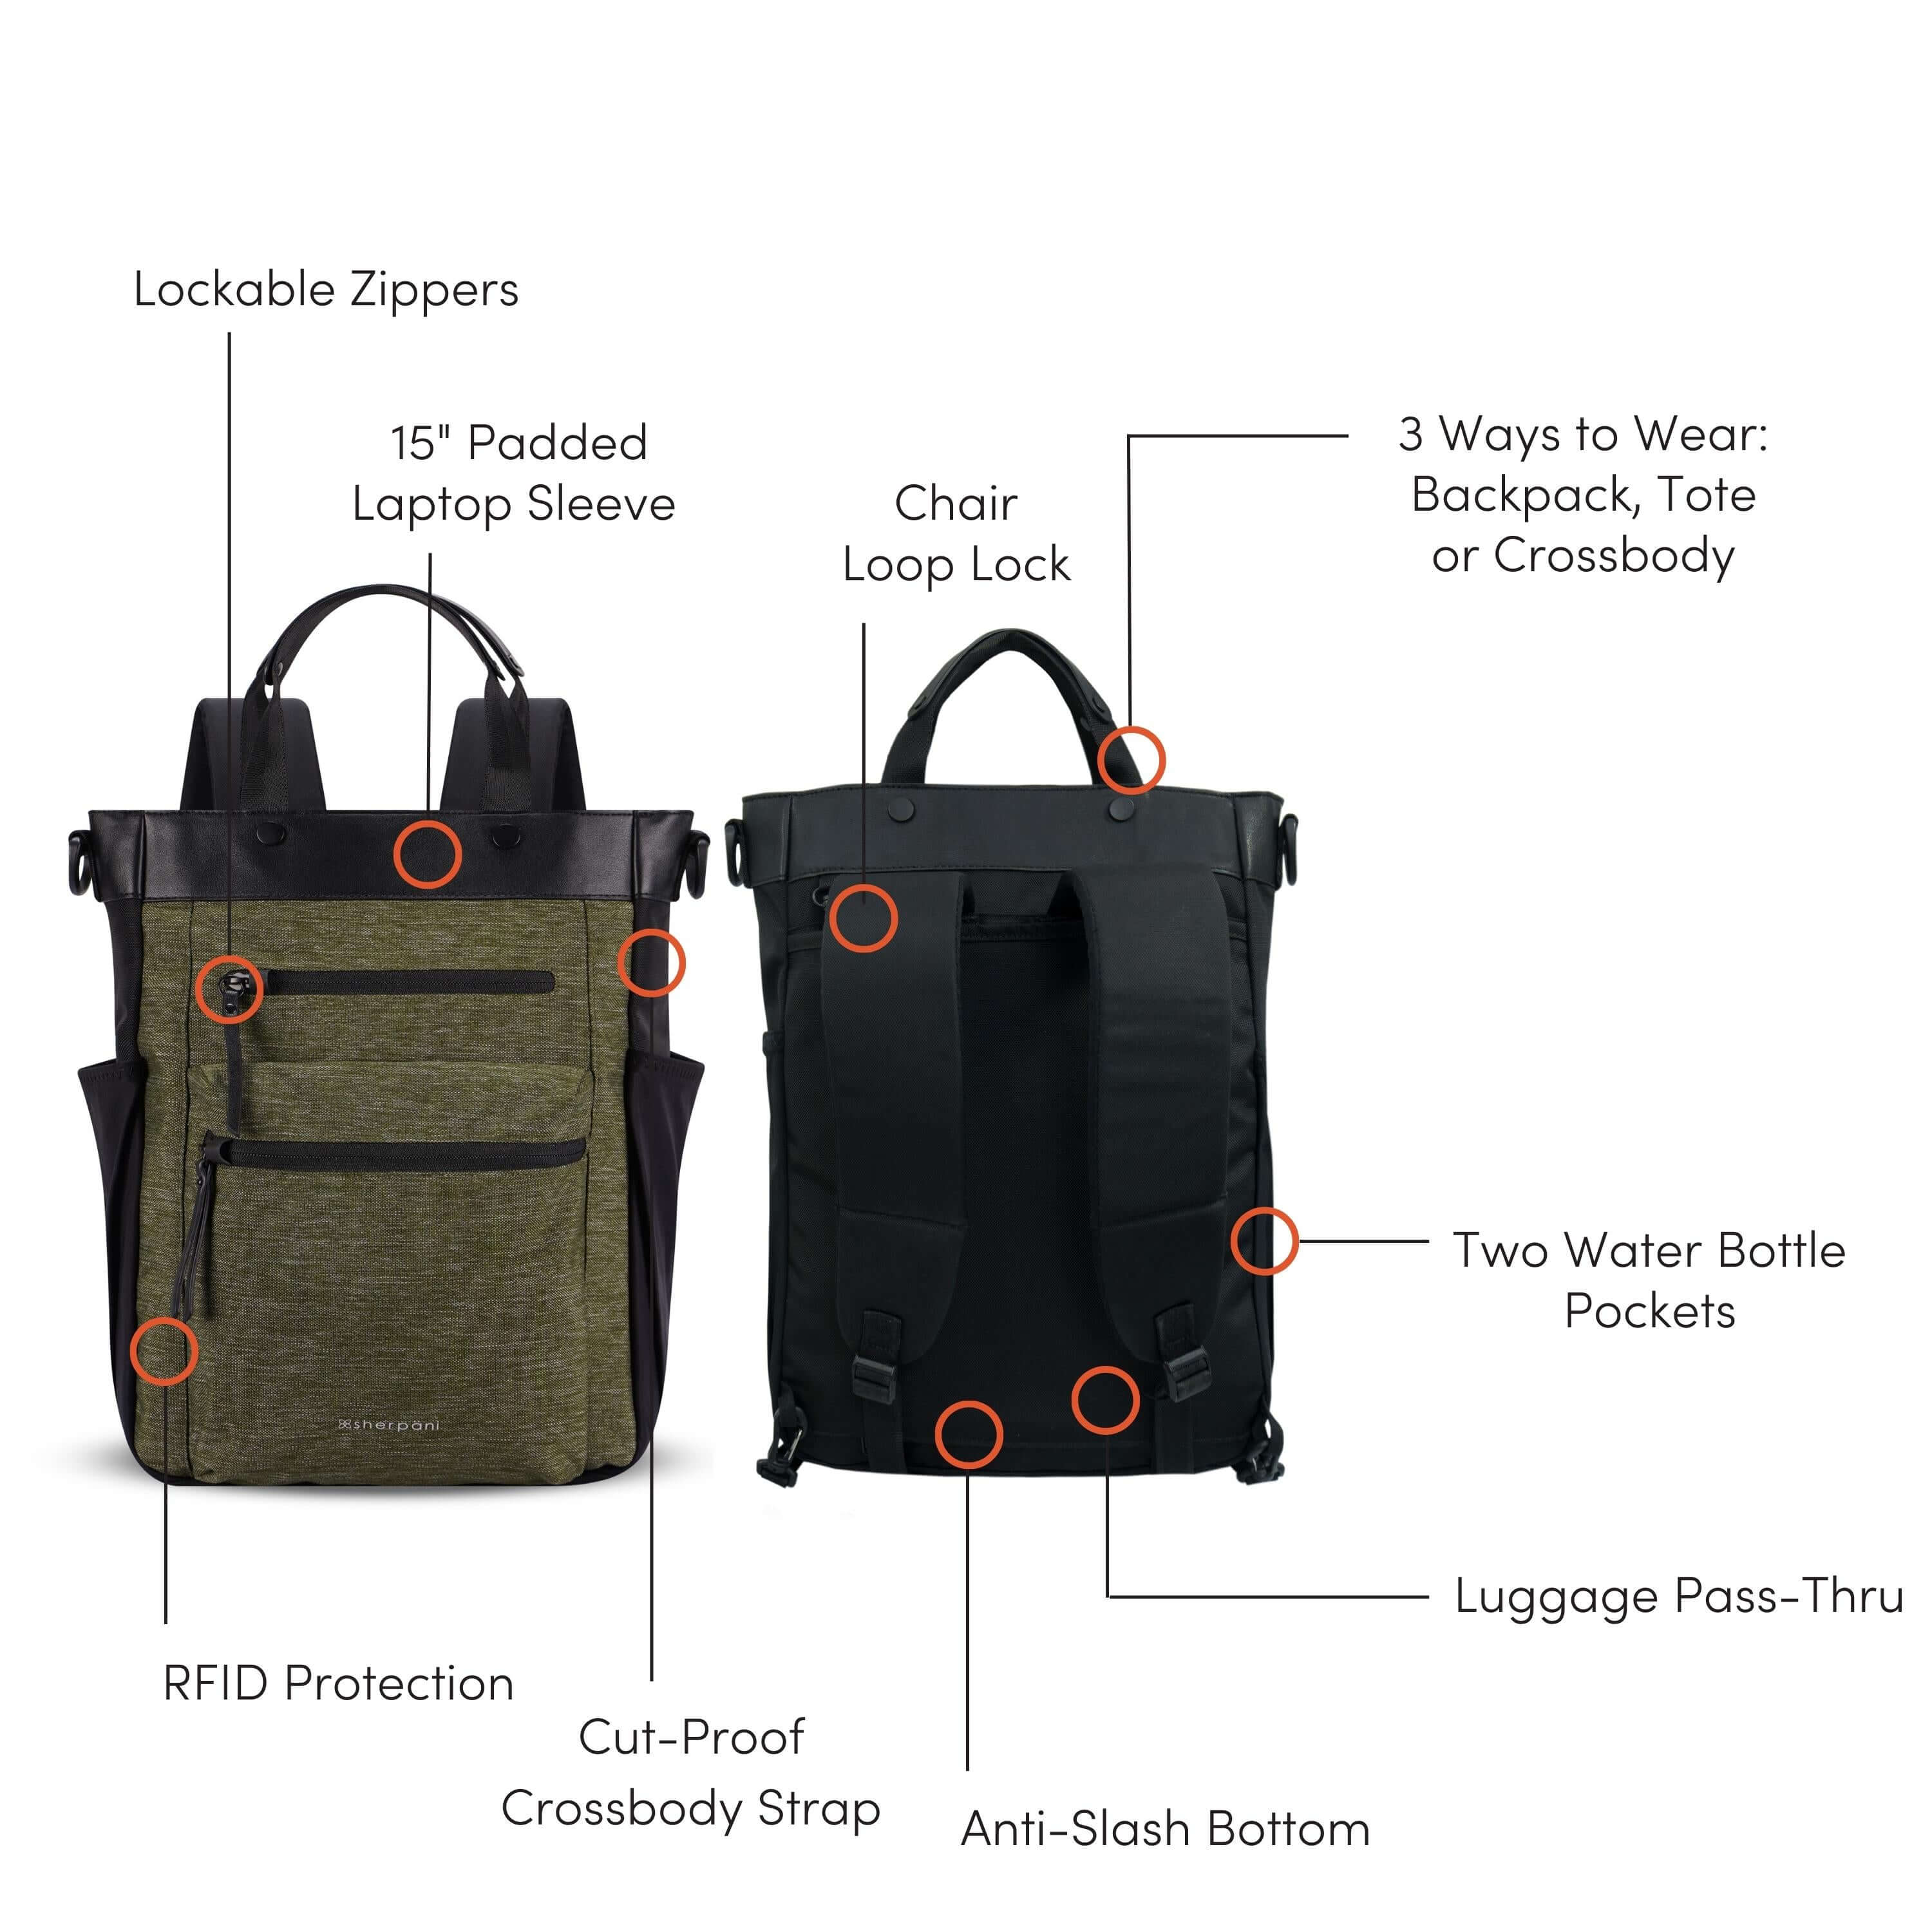 Graphic showcasing the features of Sherpani’s Anti Theft bag, the Soleil AT in Loden. There is a front and a back view of the bag, red circles highlight the following features: Lockable Zippers, 15” Padded Laptop Sleeve, Chair Loop Lock, 3 Ways to Wear: Backpack, Tote or Crossbody, Two Water Bottle Pockets, Luggage Pass-Thru, Anti-Slash Bottom, Cut-Proof Crossbody Strap, RFID Protection.